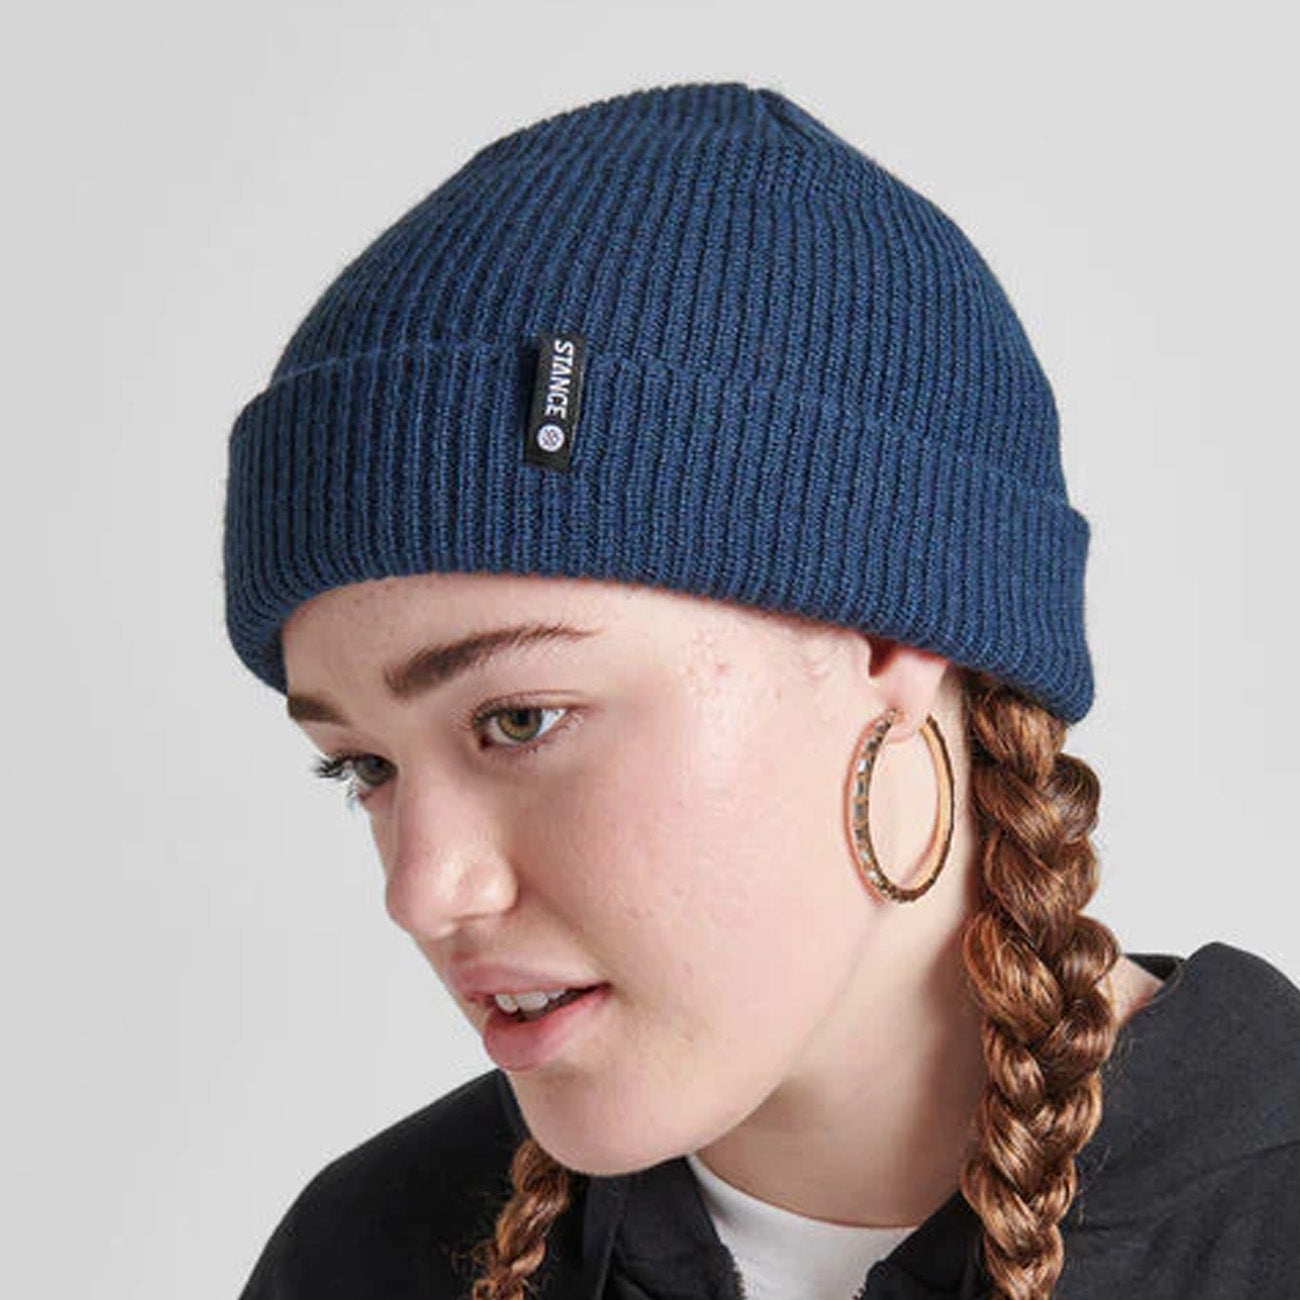 Stance Icon 2 Beanie Shallow Navy